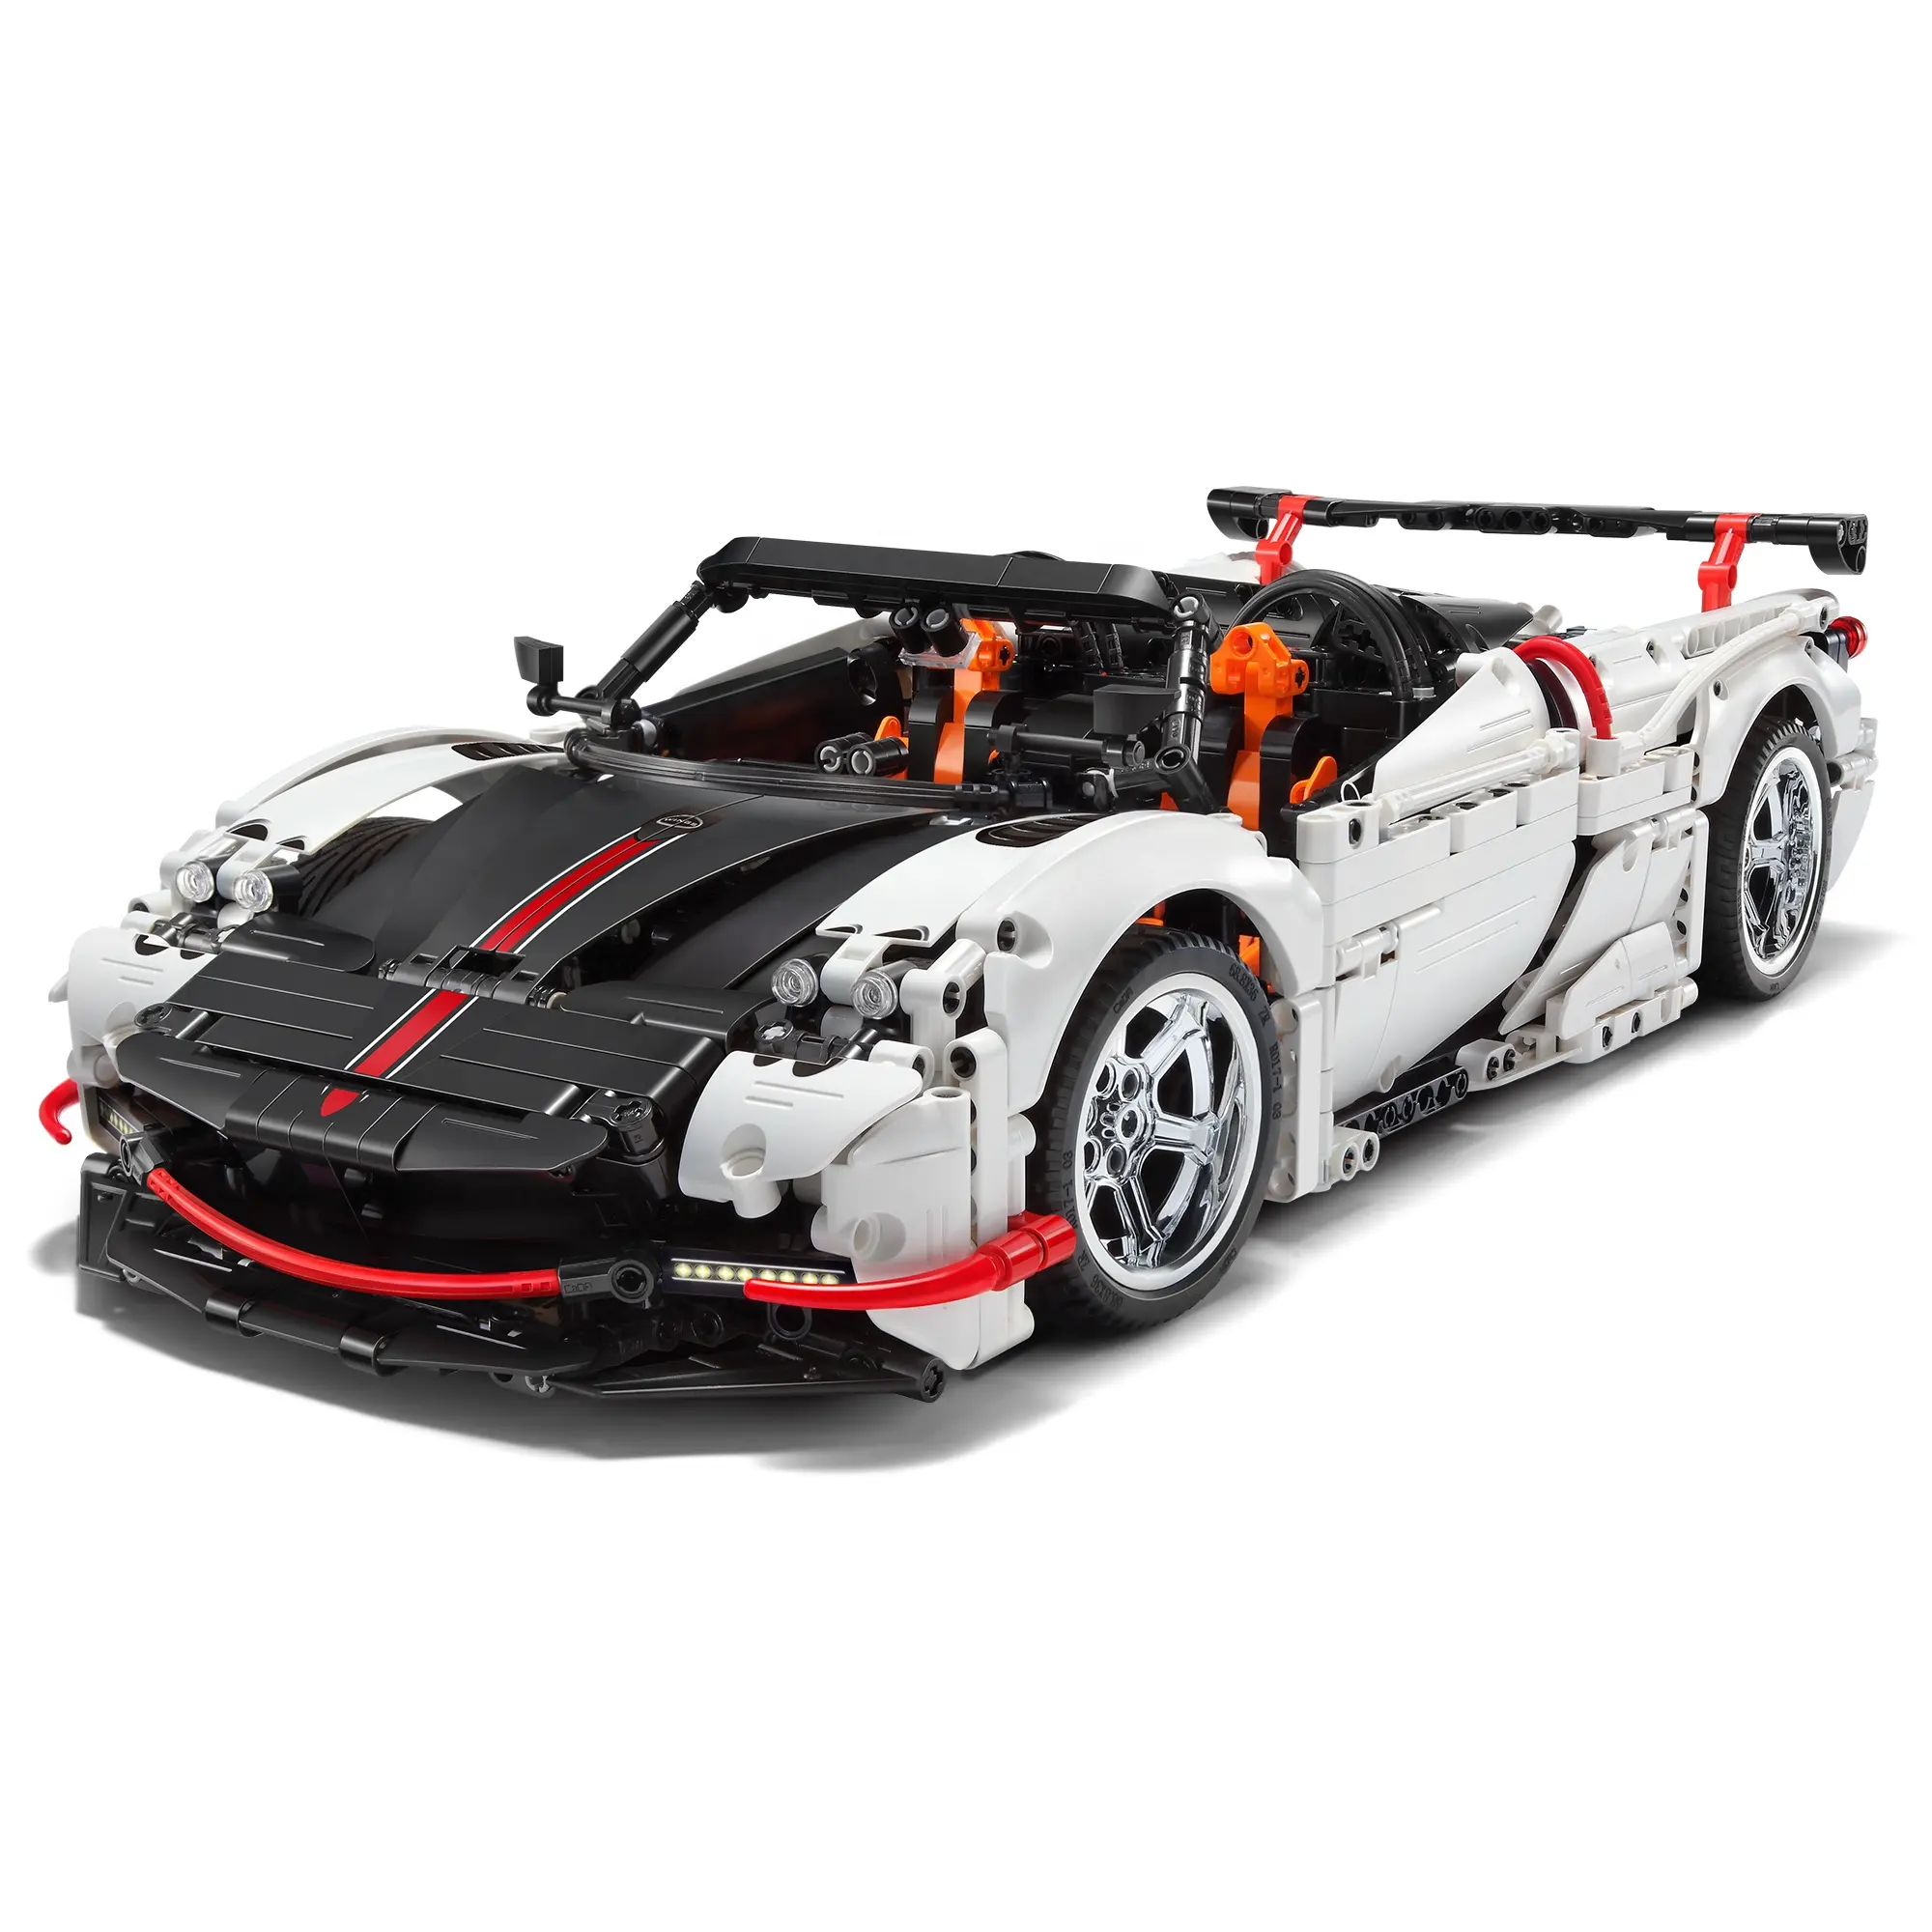 Educational Assembled Car Model Building Blocks Building Set for Adults; A Supercar Model to Build and Display